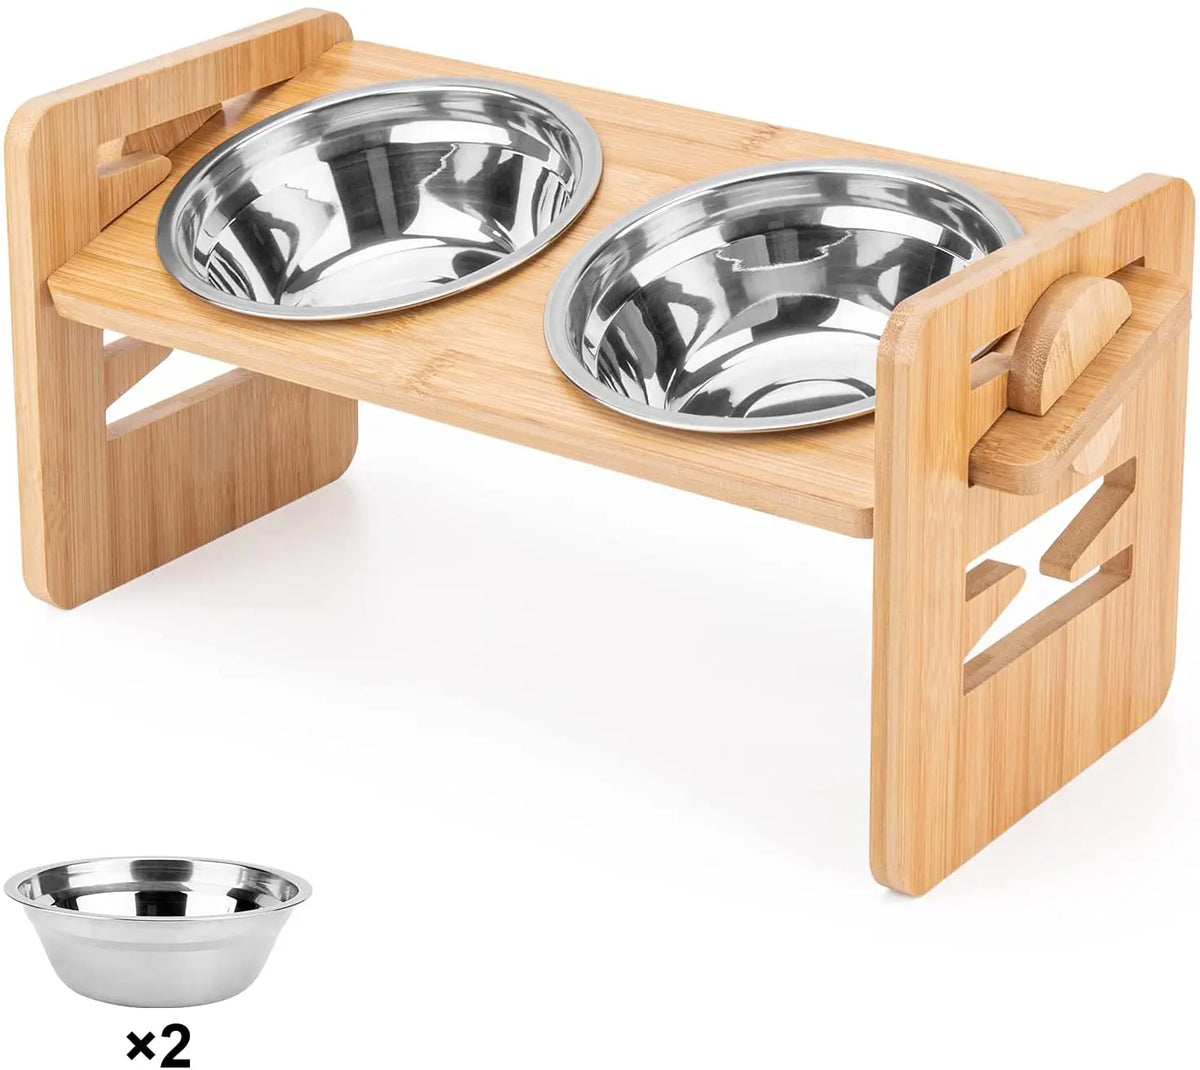 Elevated Stainless Steel Bowl w/ Adjustable Stand